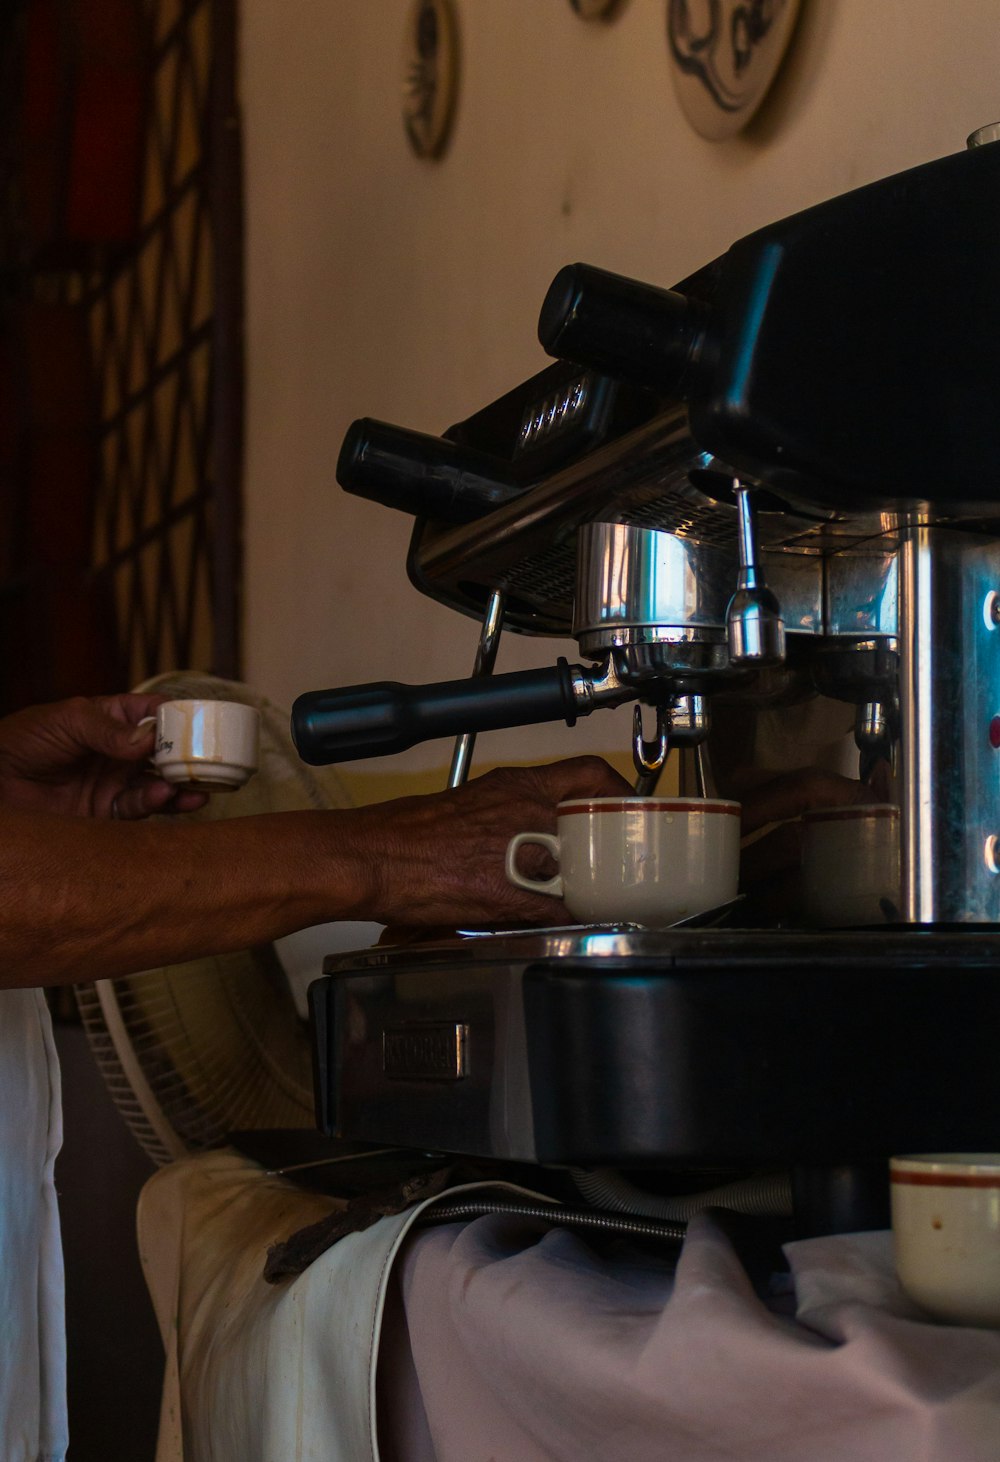 a person is using a coffee machine to make a cup of coffee